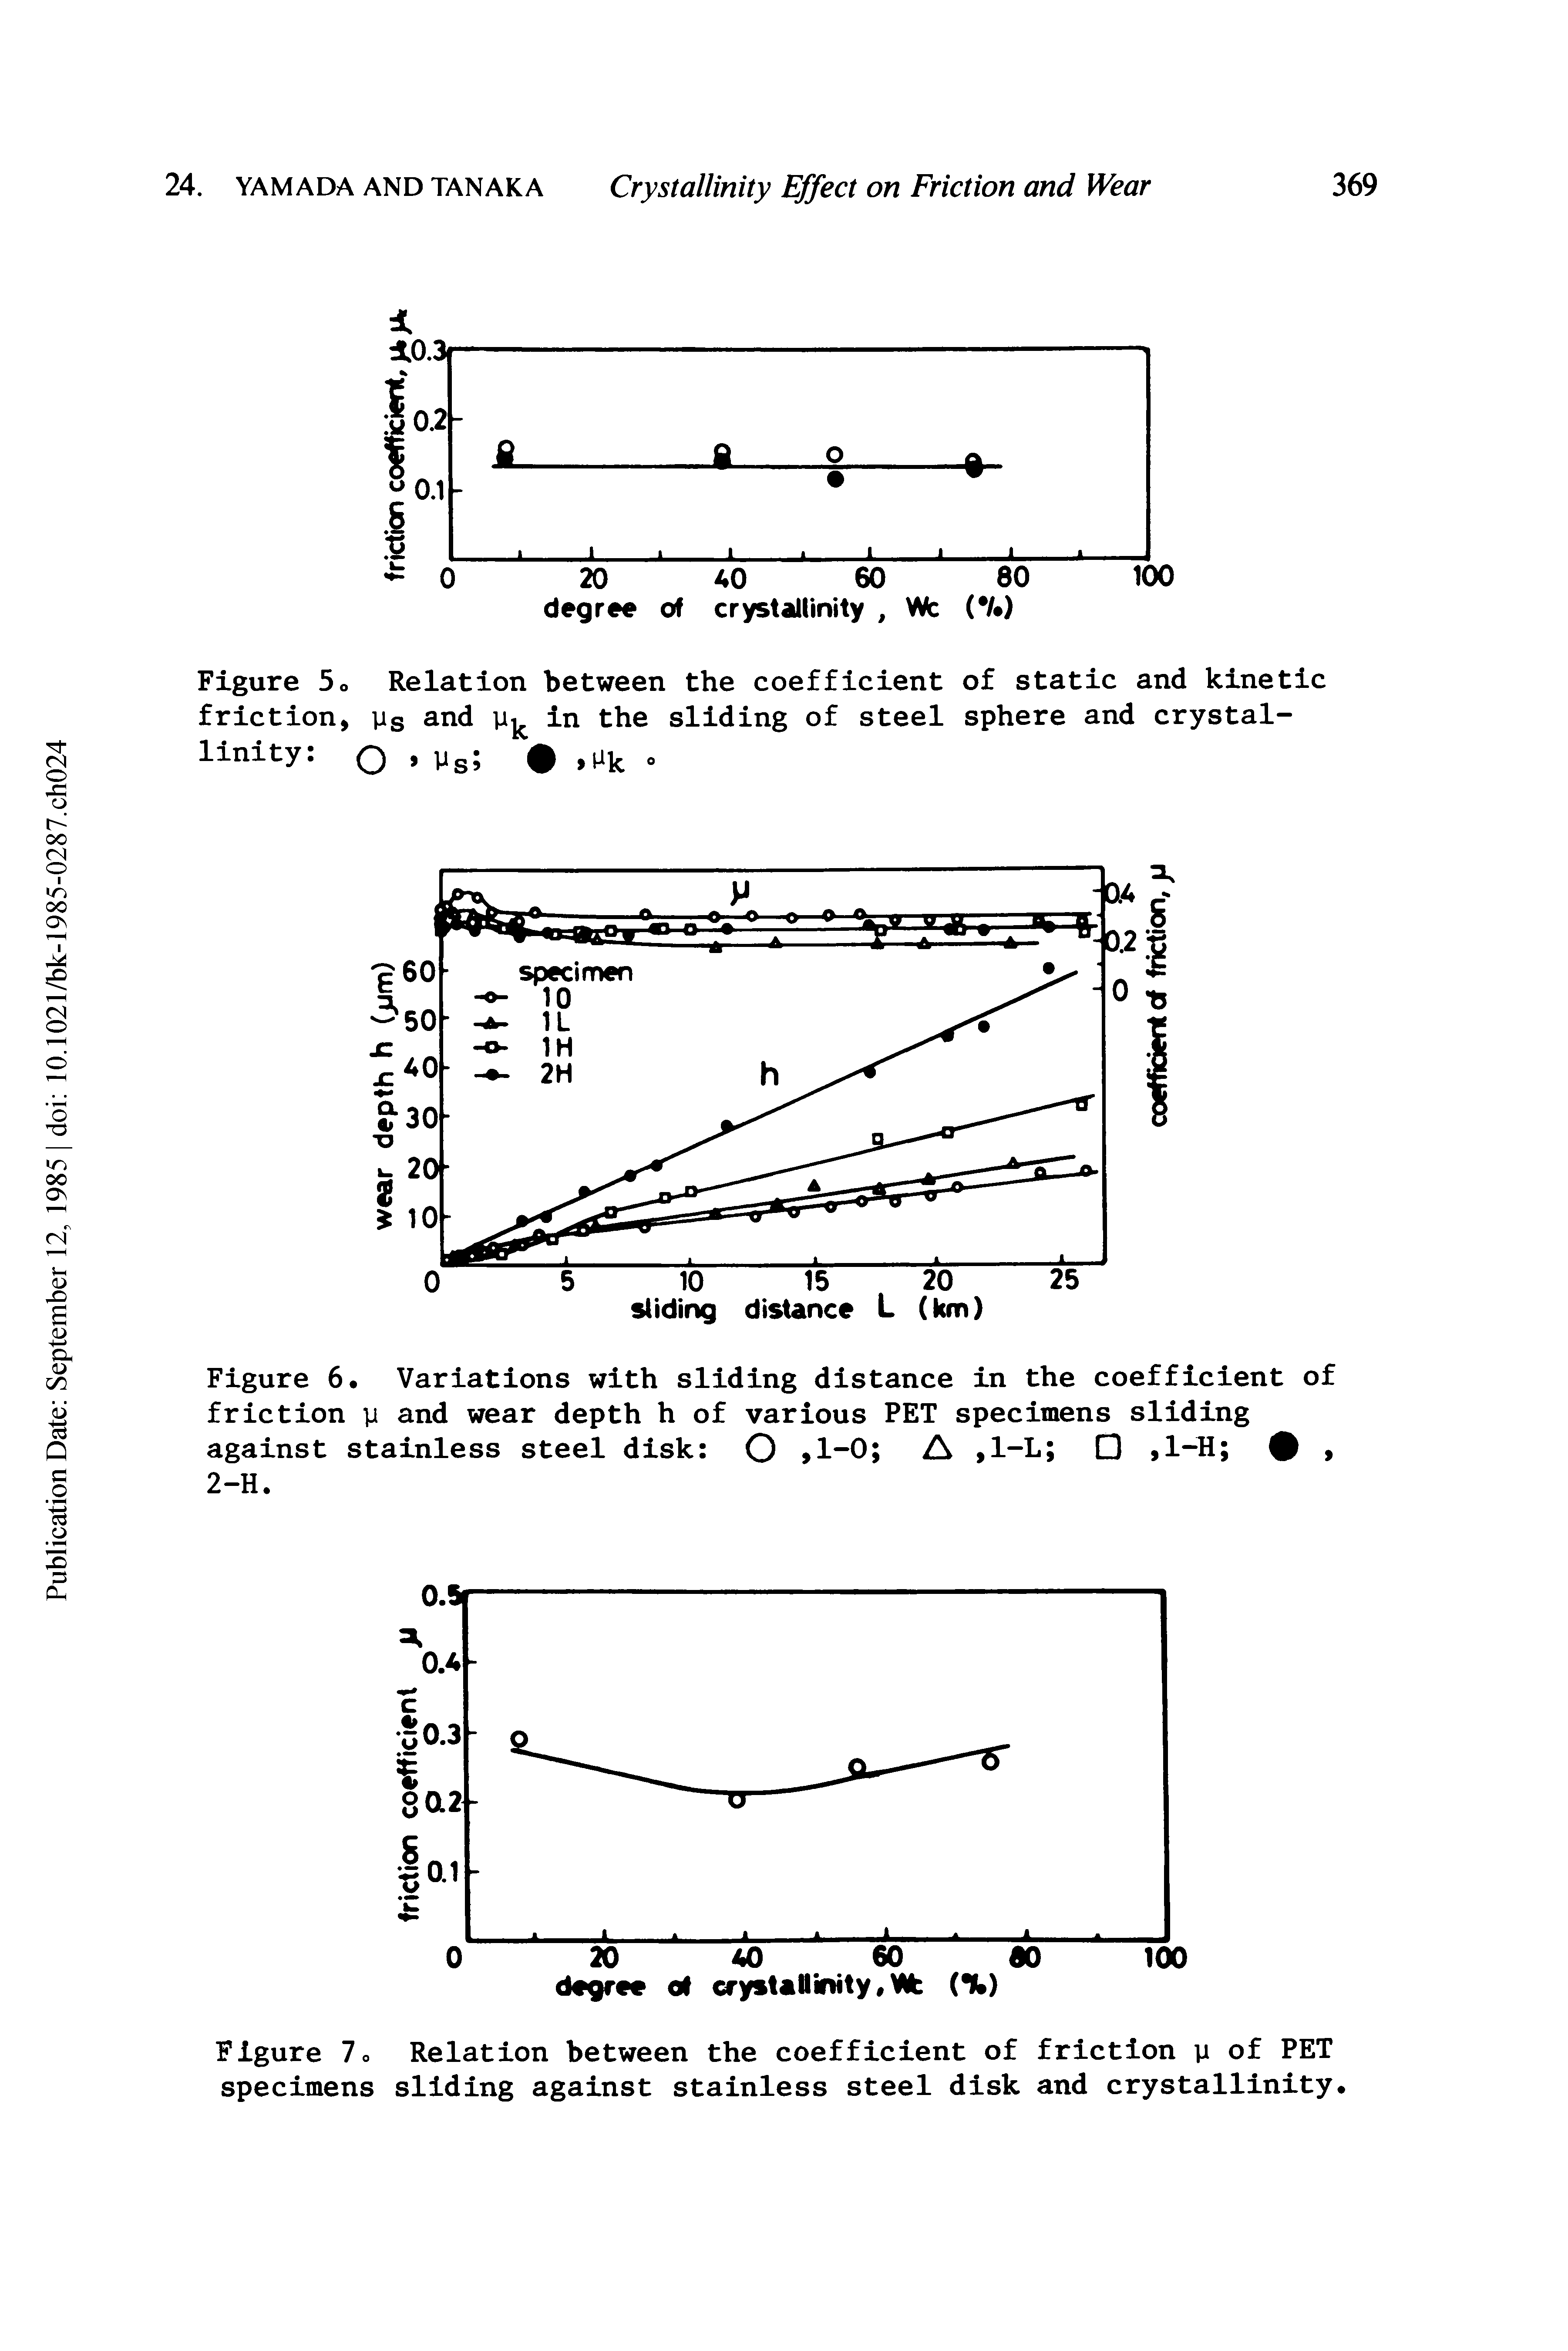 Figure 7o Relation between the coefficient of friction y of PET specimens sliding against stainless steel disk and crystallinity.